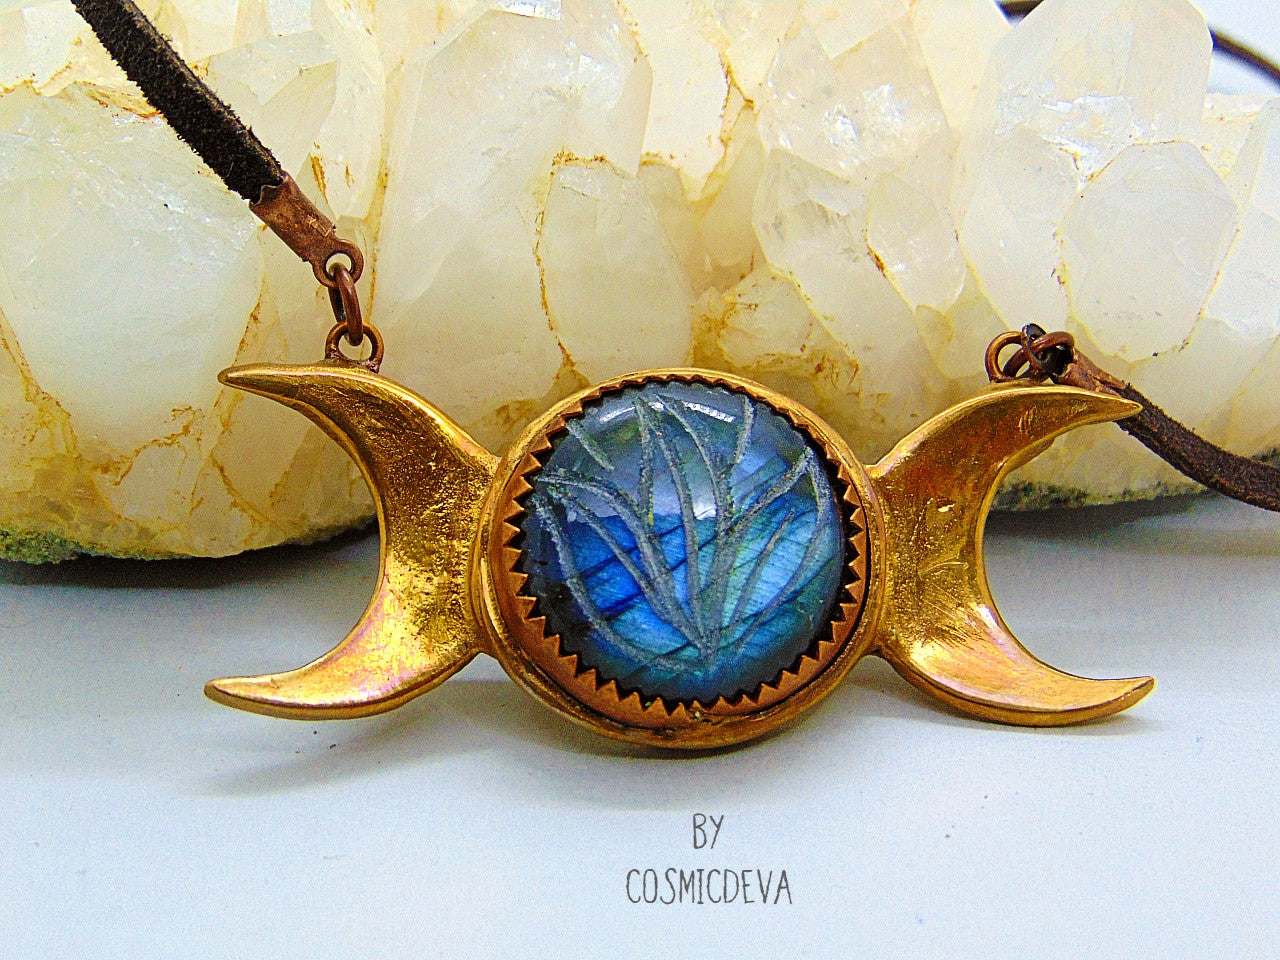 Wear the Triple Moon Goddess necklace as a powerful reminder of your connection to the divine feminine. Crafted with pure gold bronze and featuring a stunning blue labradorite gemstone with a floral engravement.- CosmicDeva